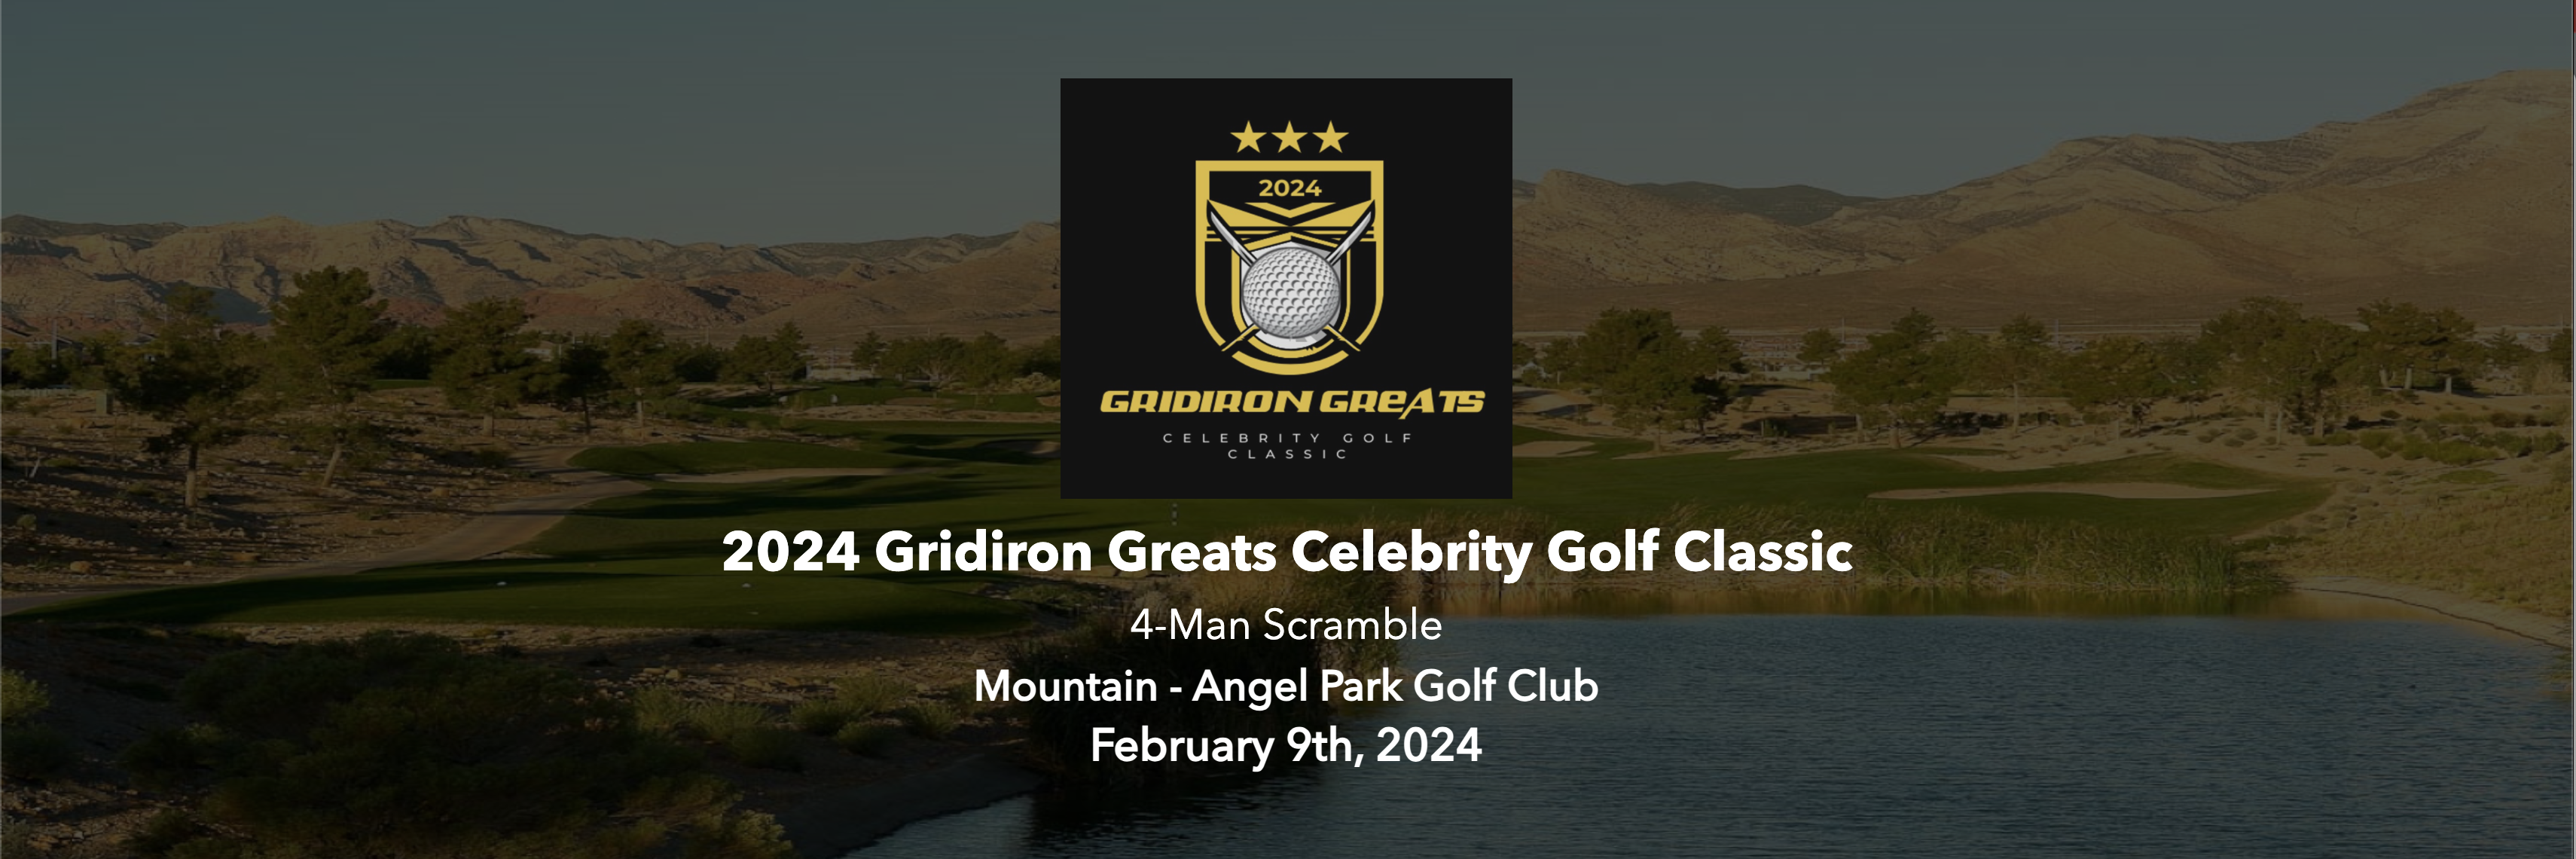 NFL Legend and Cannabis Advocate Jim McMahon to Host Second Celebrity Golf Classic “Gridiron Greats” on Super Bowl Weekendd